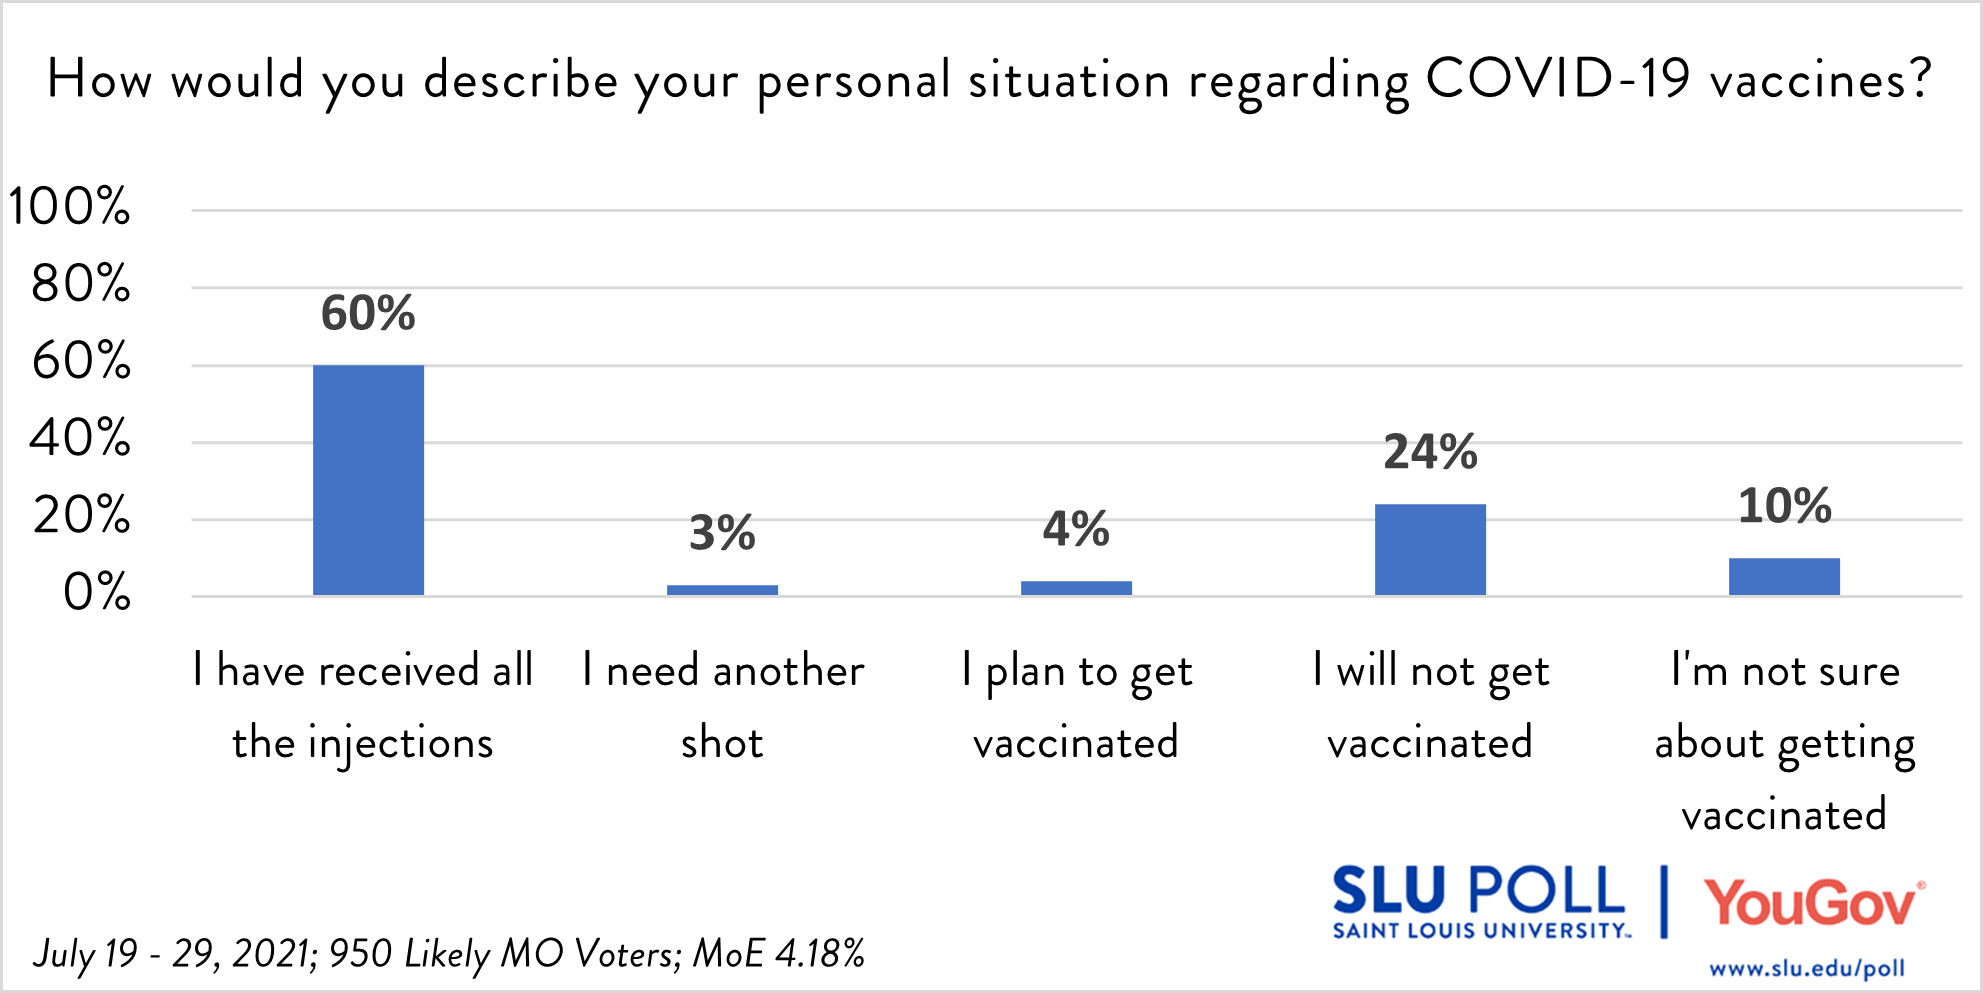 How would you describe your personal situation regarding COVID-19 vaccines? - I have received all the injections required to be fully vaccinated against COVID–19: 60% - I have started the vaccination process, but need another shot: 3% - I plan to get vaccinated: 4% - I will not get vaccinated: 24% - I’m not sure about getting vaccinated: 10%